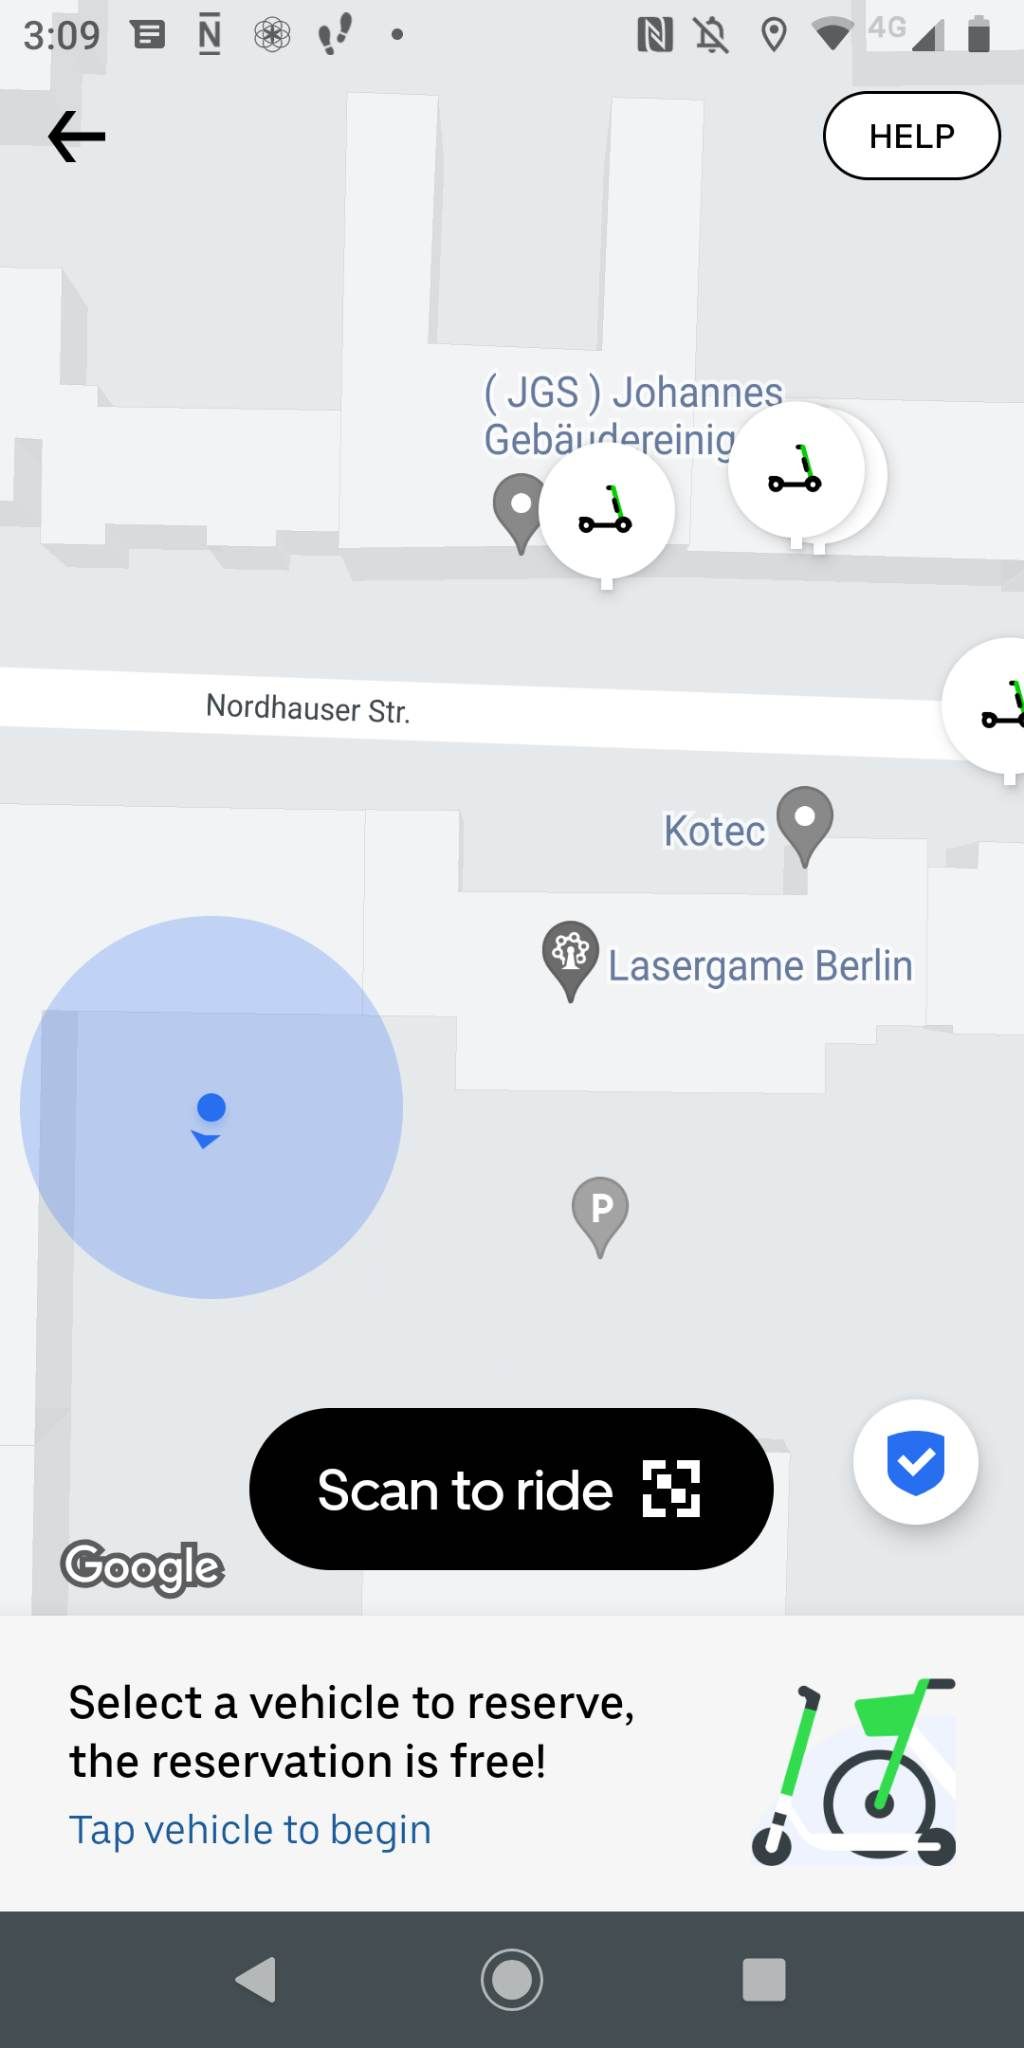 Uber app showing location of vehicles